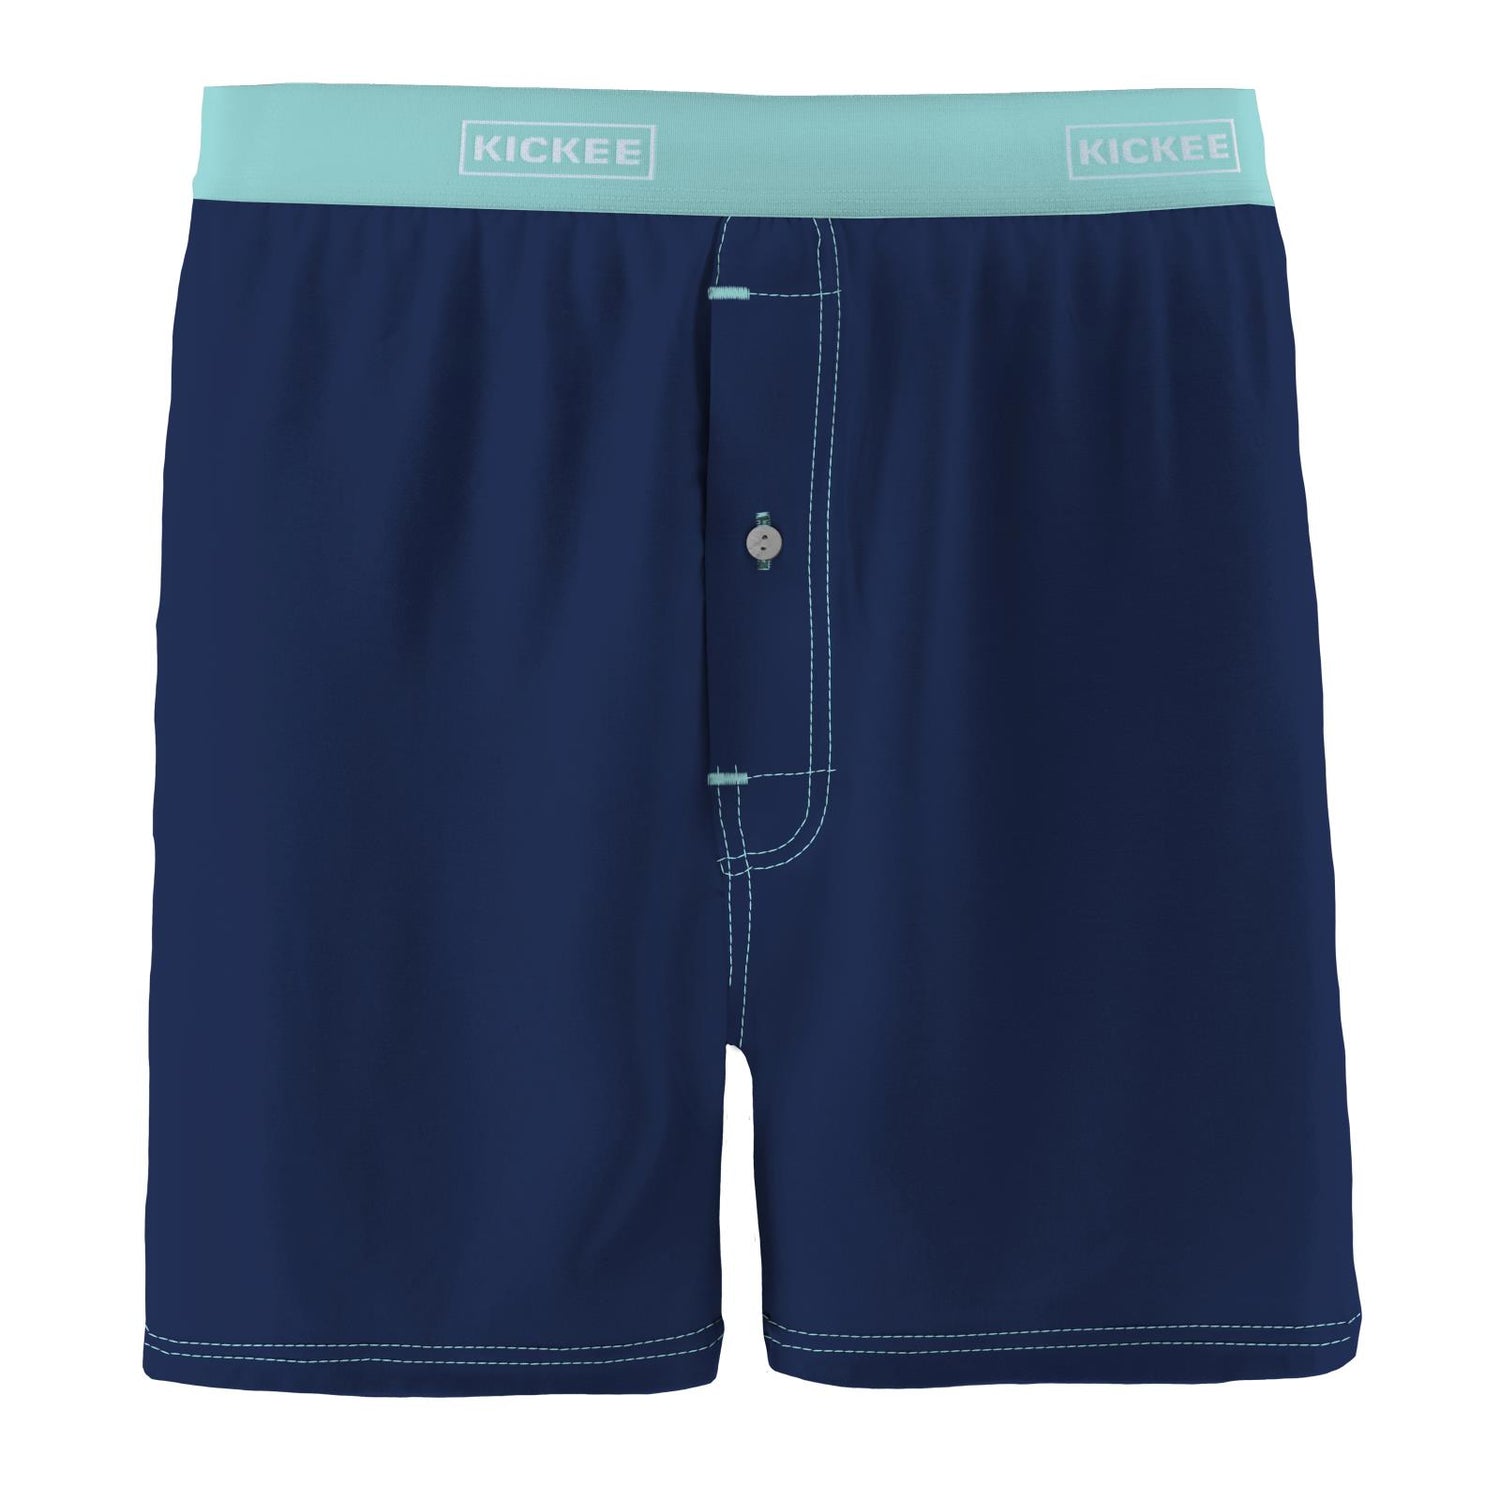 Men's Boxer Shorts in Flag Blue with Summer Sky